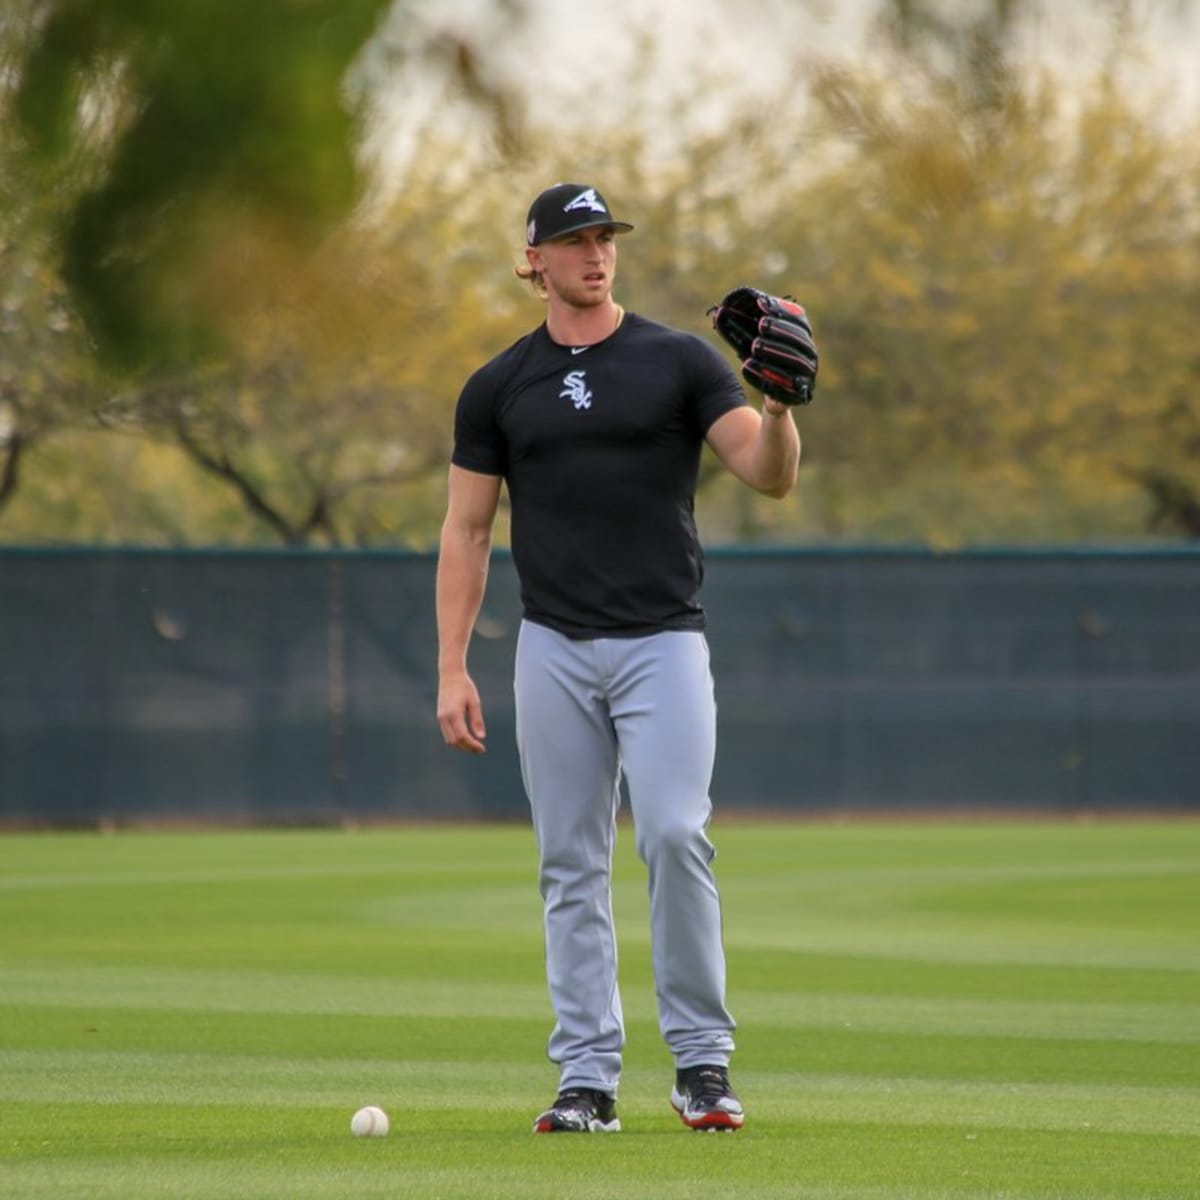 Why is White Sox prospect Michael Kopech sitting out the 2020